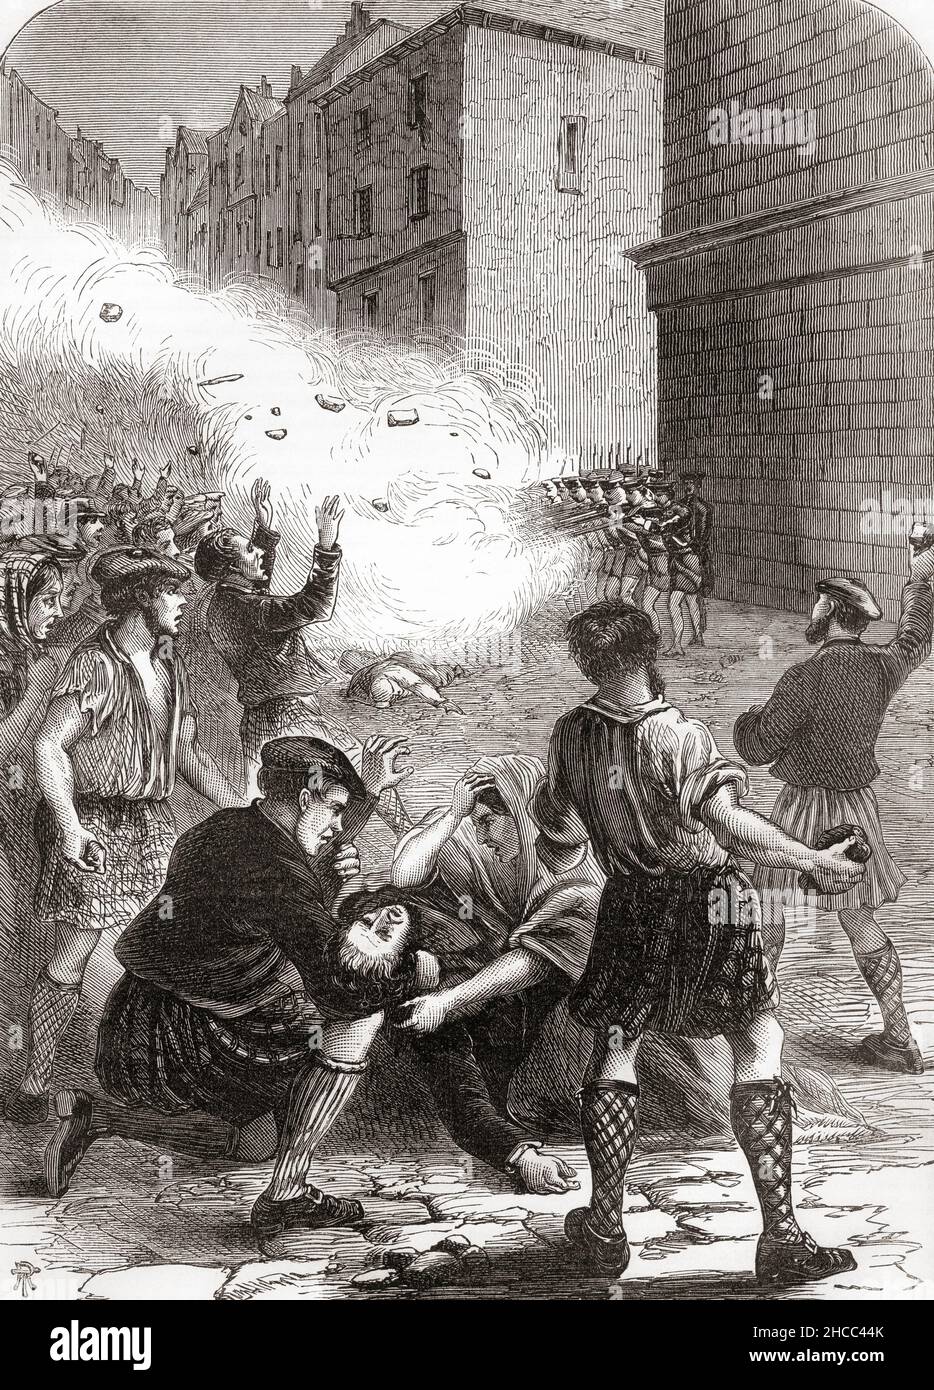 Soldiers firing on rioters during the Malt Tax riots of 1725.  In 1725 a move to raise revenue by 3 pence on every bushel of malt, though half the rate in England, provoked severe riots in Glasgow.  From Cassell's Illustrated History of England, published c.1890. Stock Photo